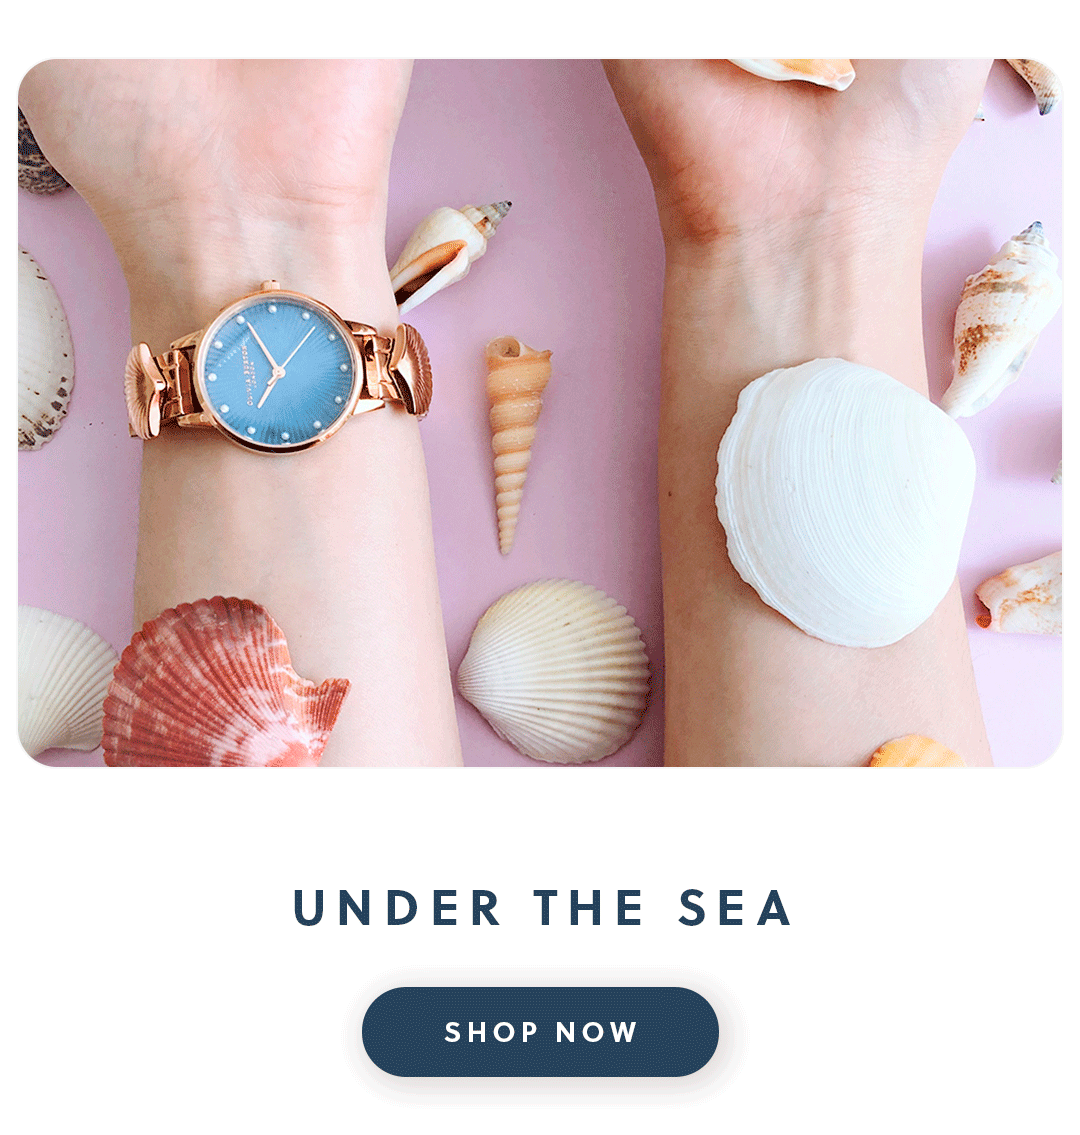 An Olivia Burton watch surrounded by sea shells with text under the sea shop now